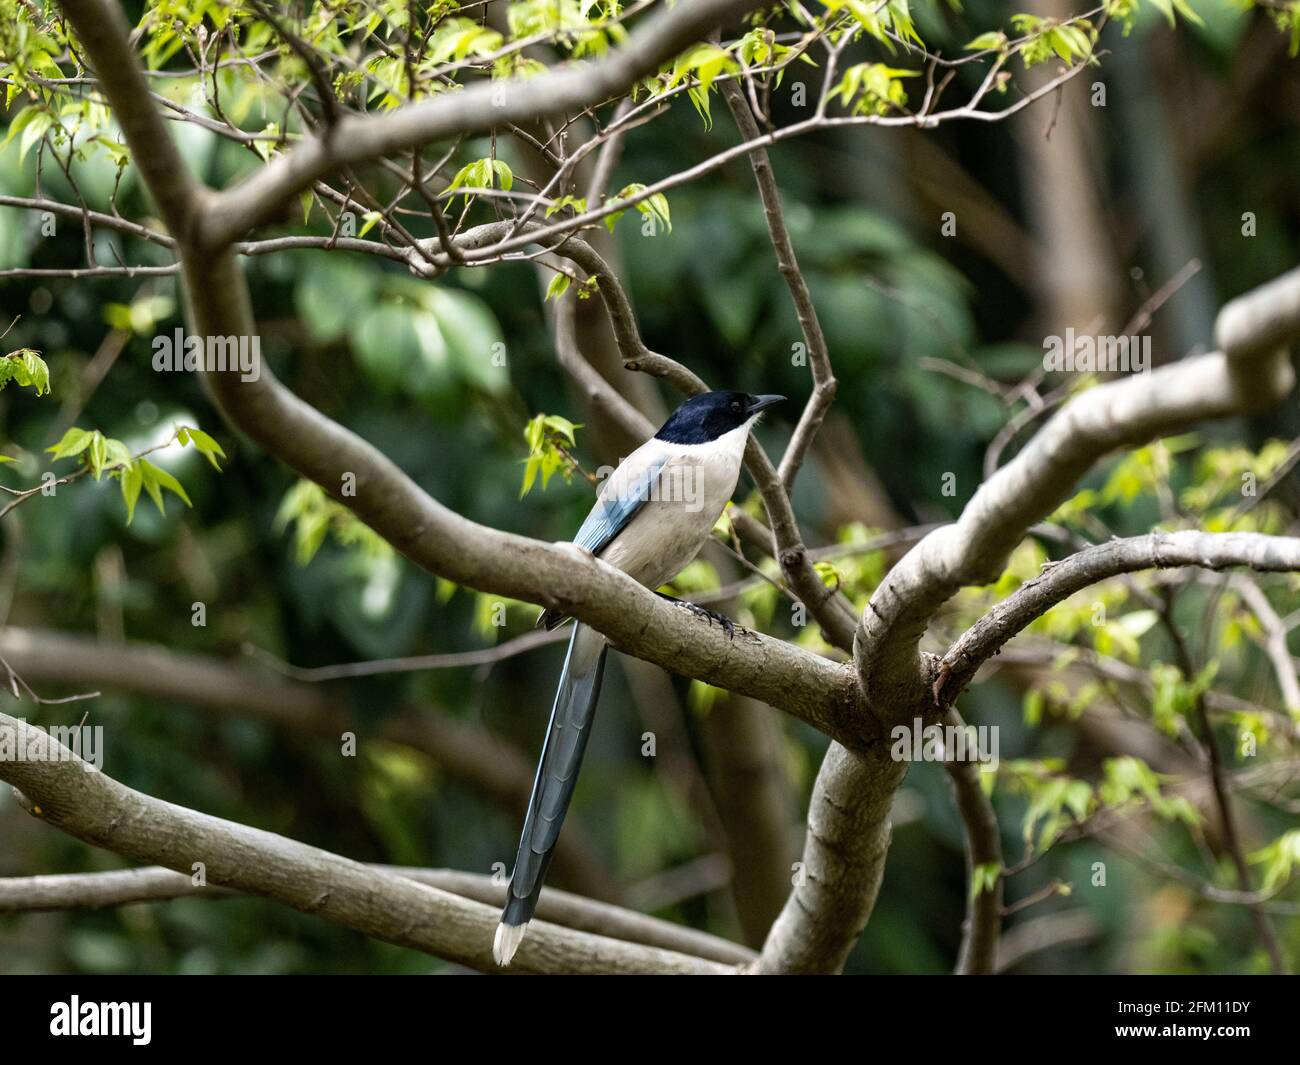 Azure-winged magpie perched on a tree branches Stock Photo